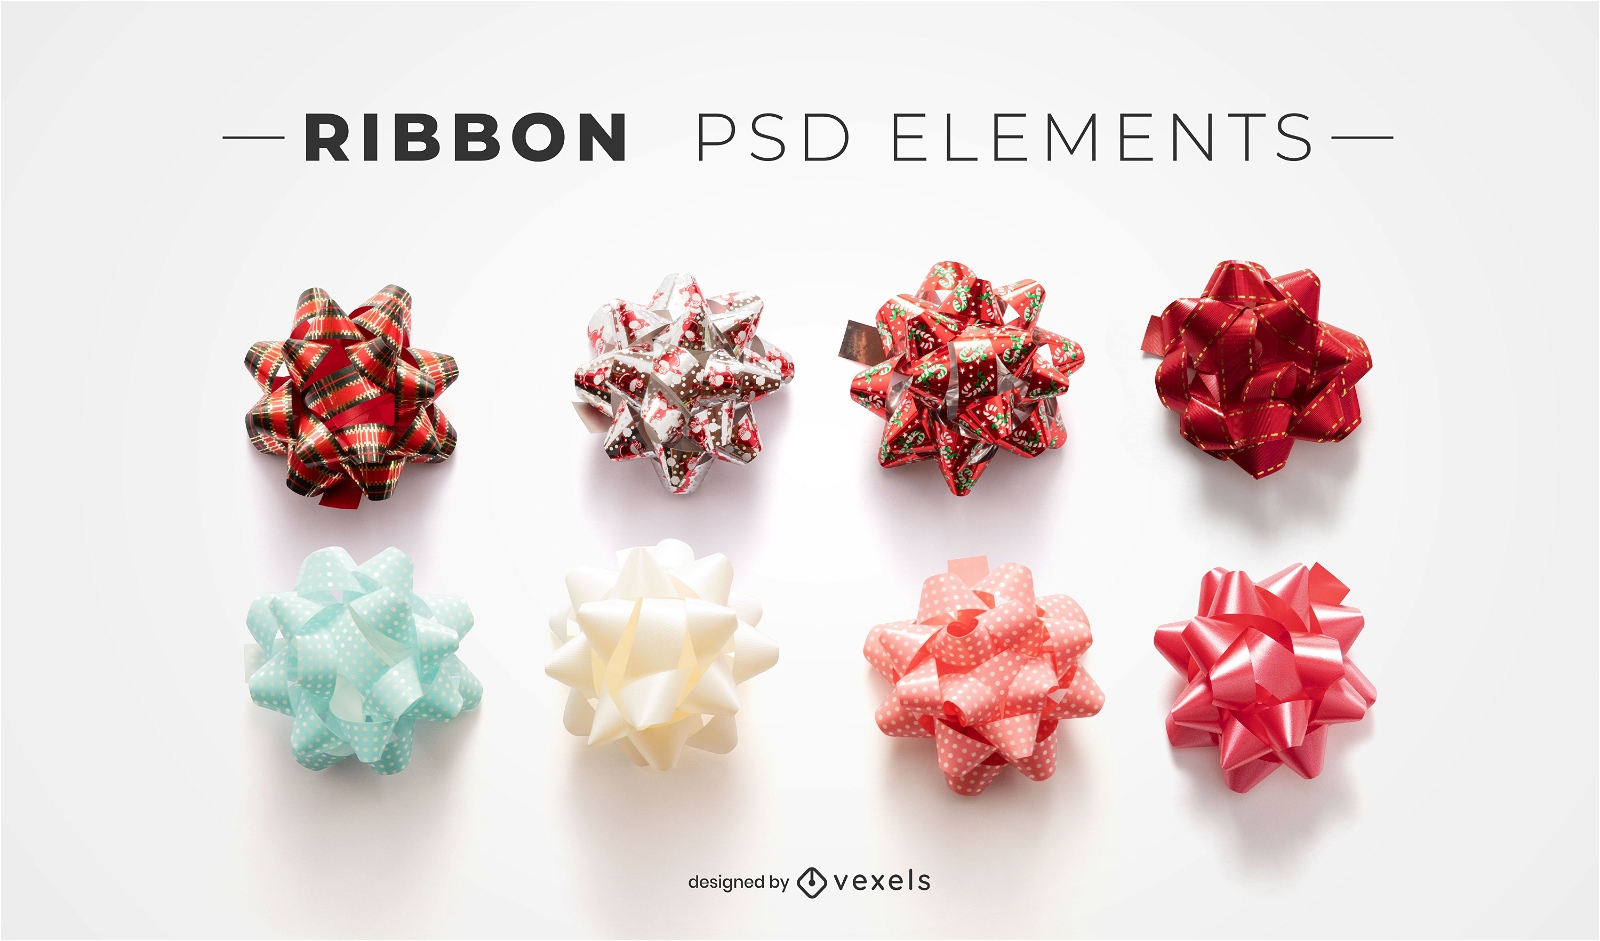 Ribbons psd elements for mockups